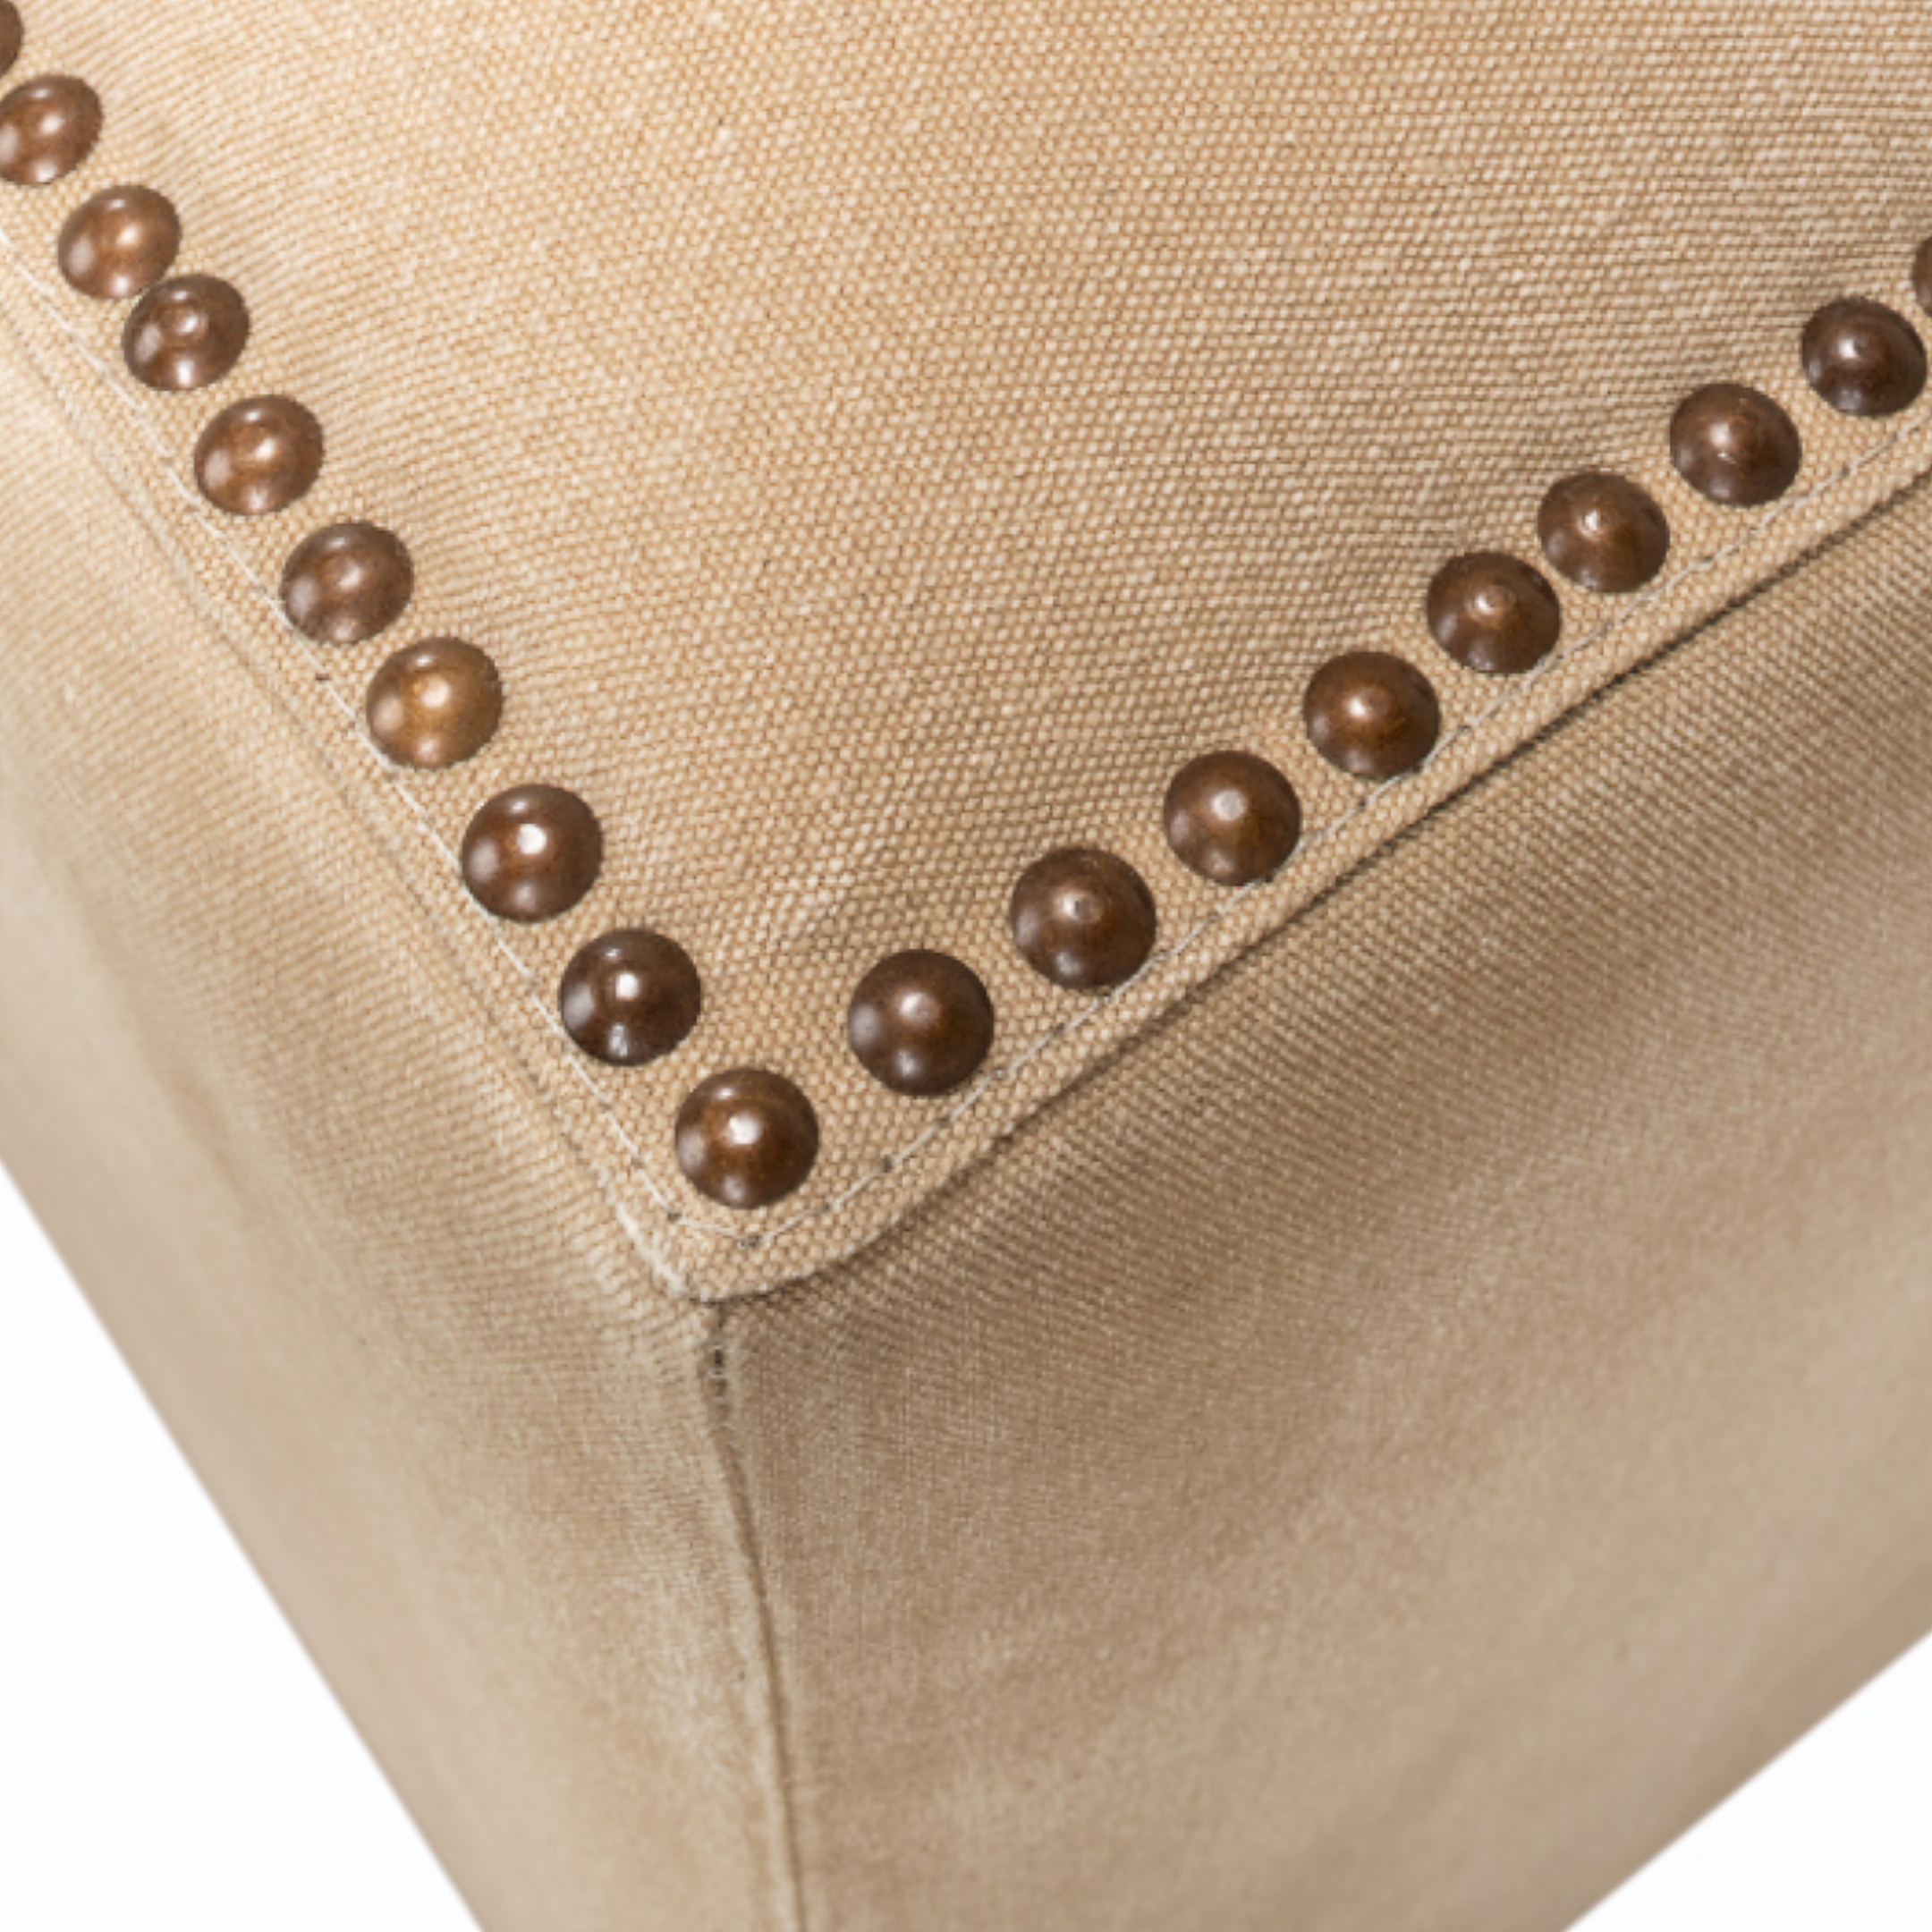 Strap Canvas & Leather Stool